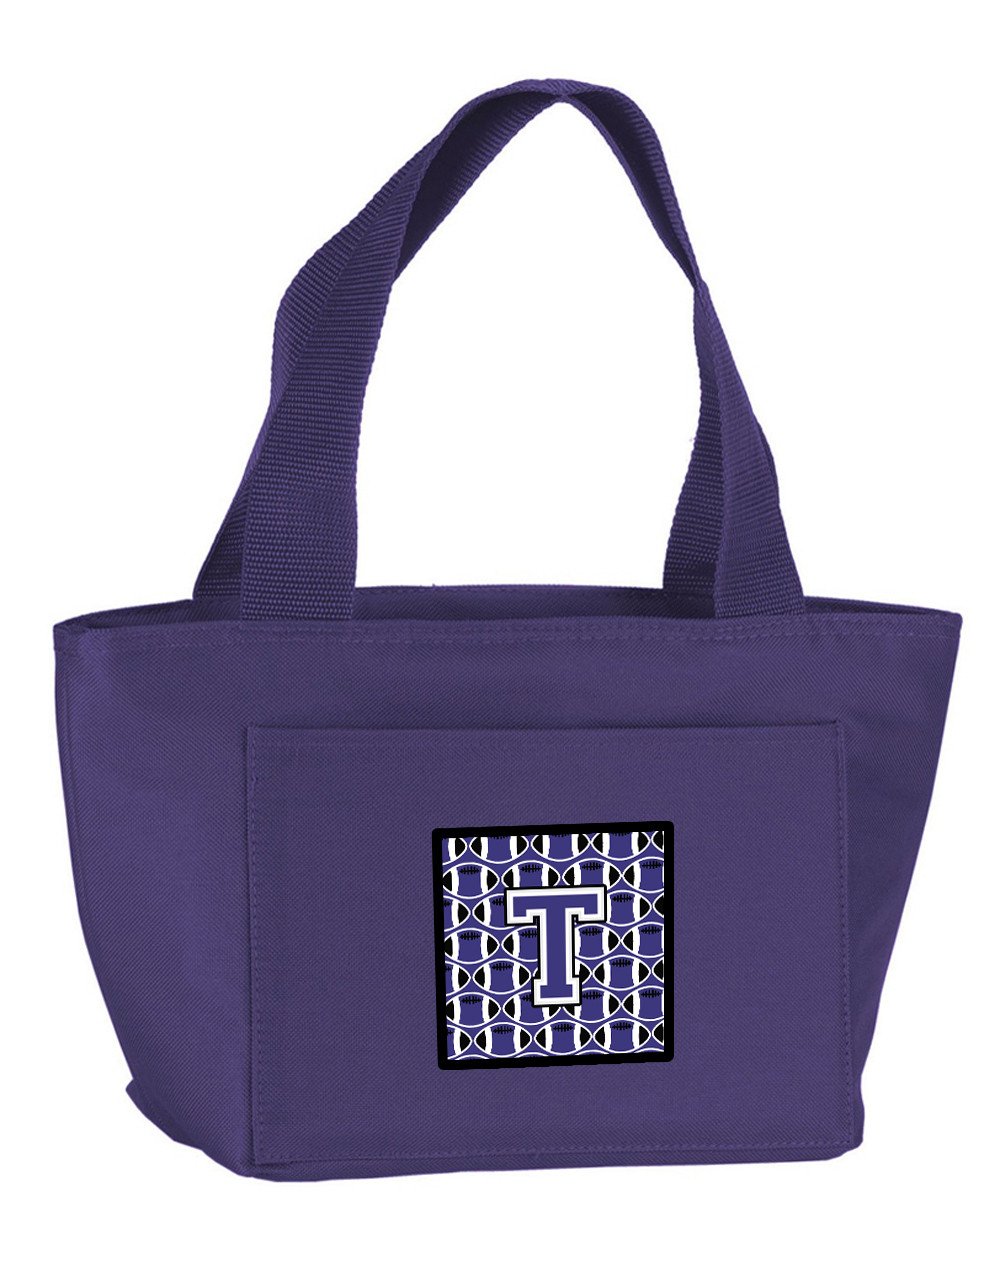 Letter T Football Purple and White Lunch Bag CJ1068-TPR-8808 by Caroline's Treasures